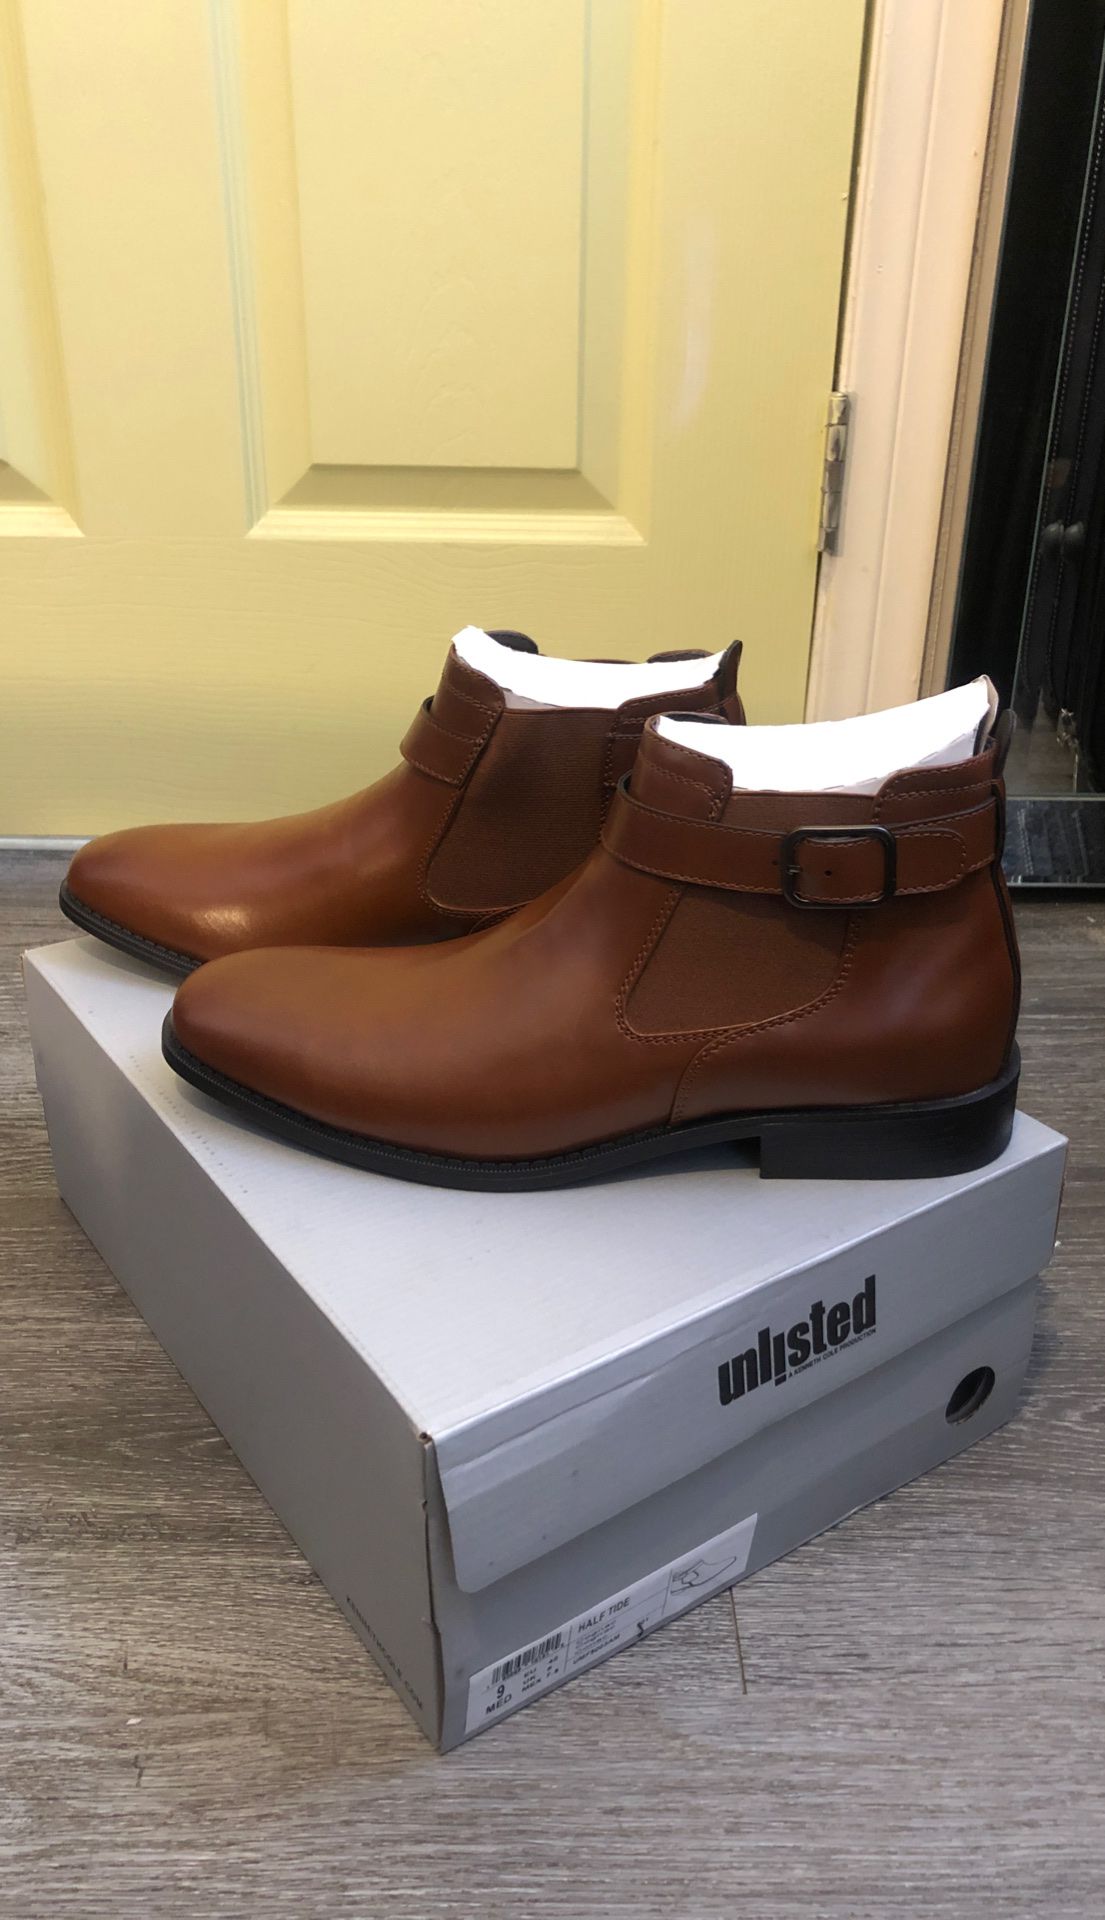 Kenneth Cole unlisted half tide cognac boots